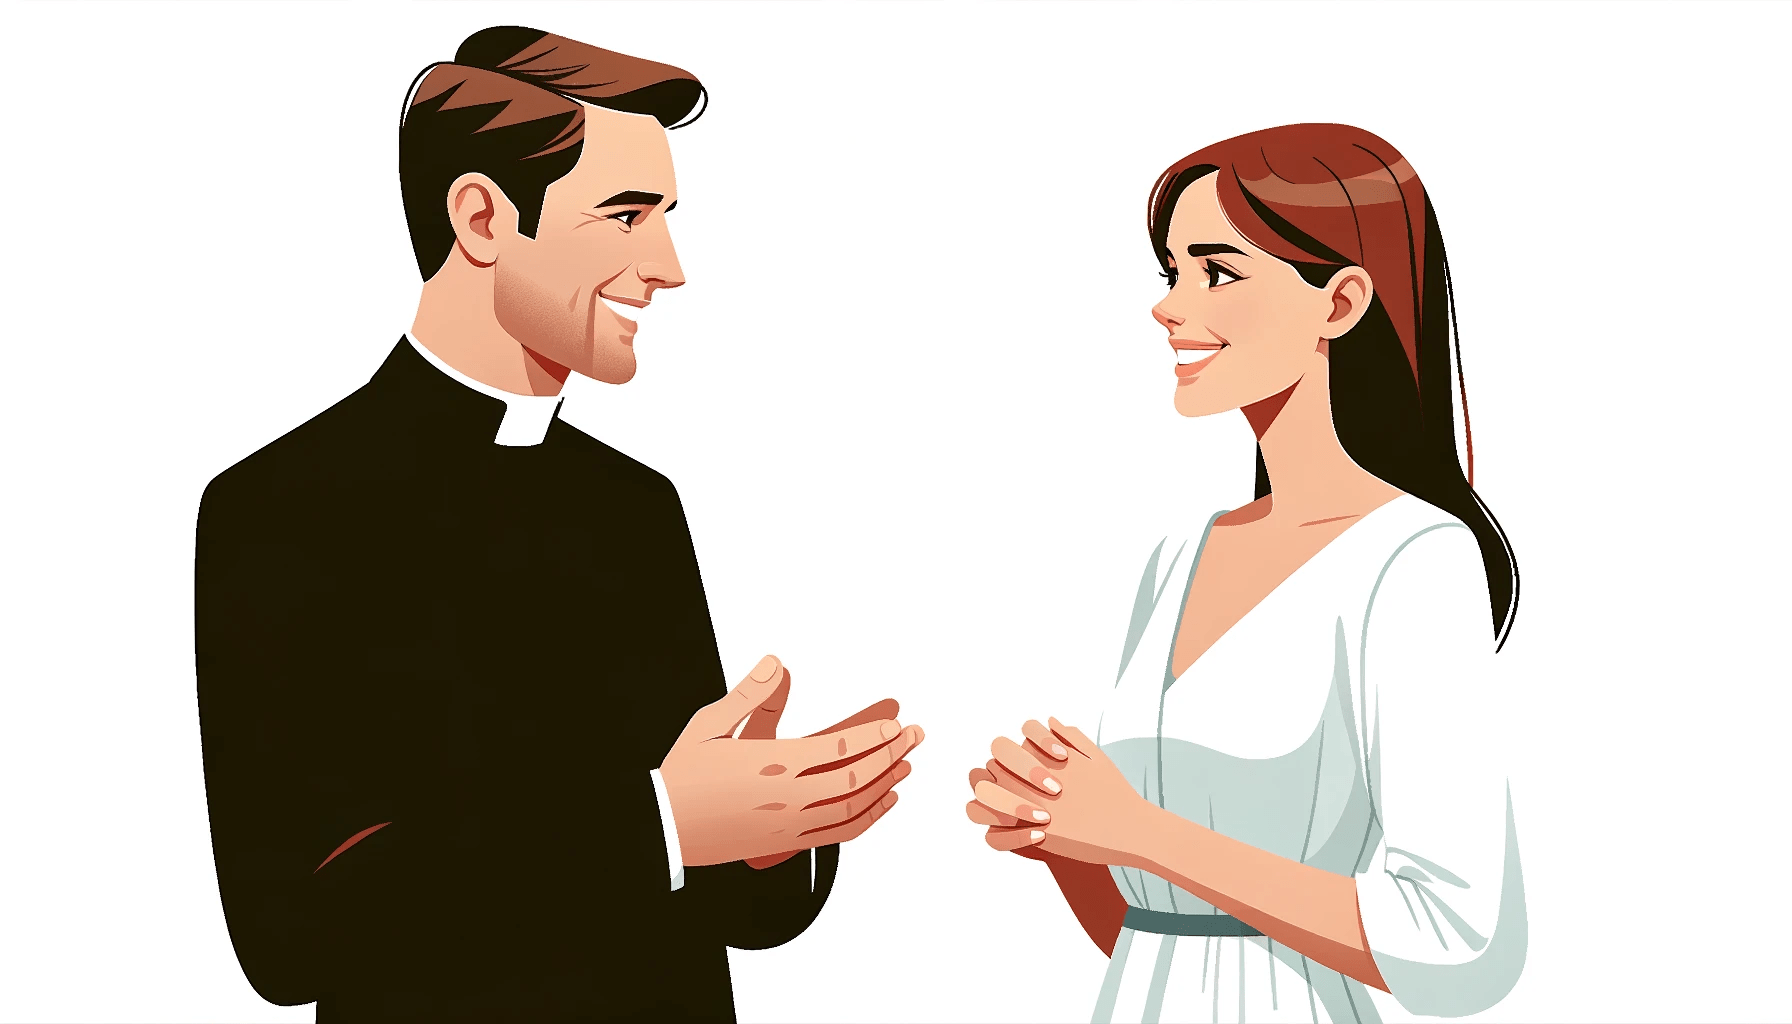 Priest talking to a woman